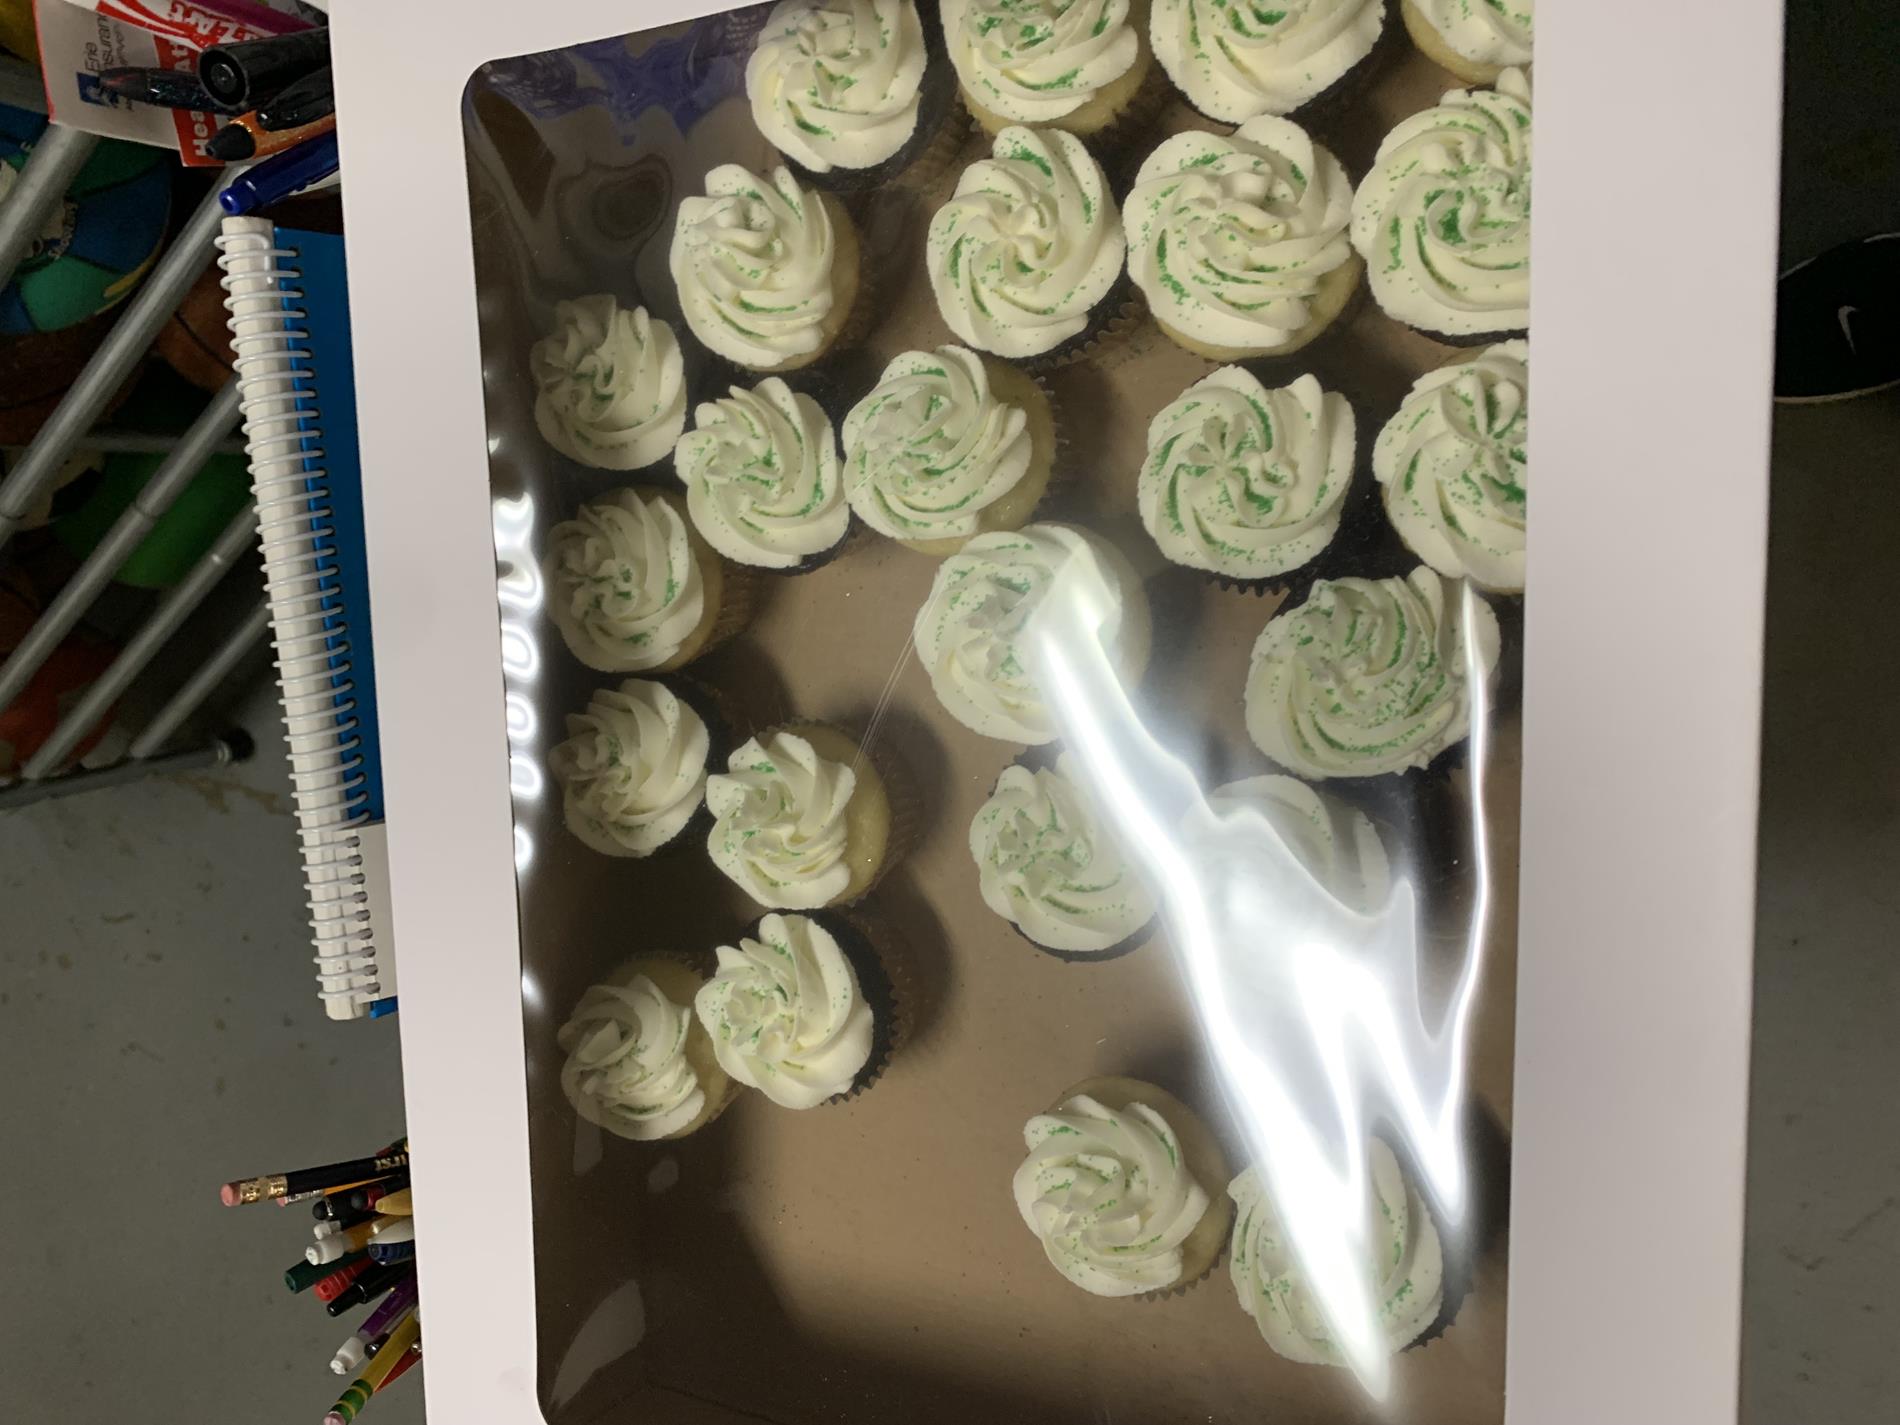 Thank you, Ashley, for the delicious cupcakes!